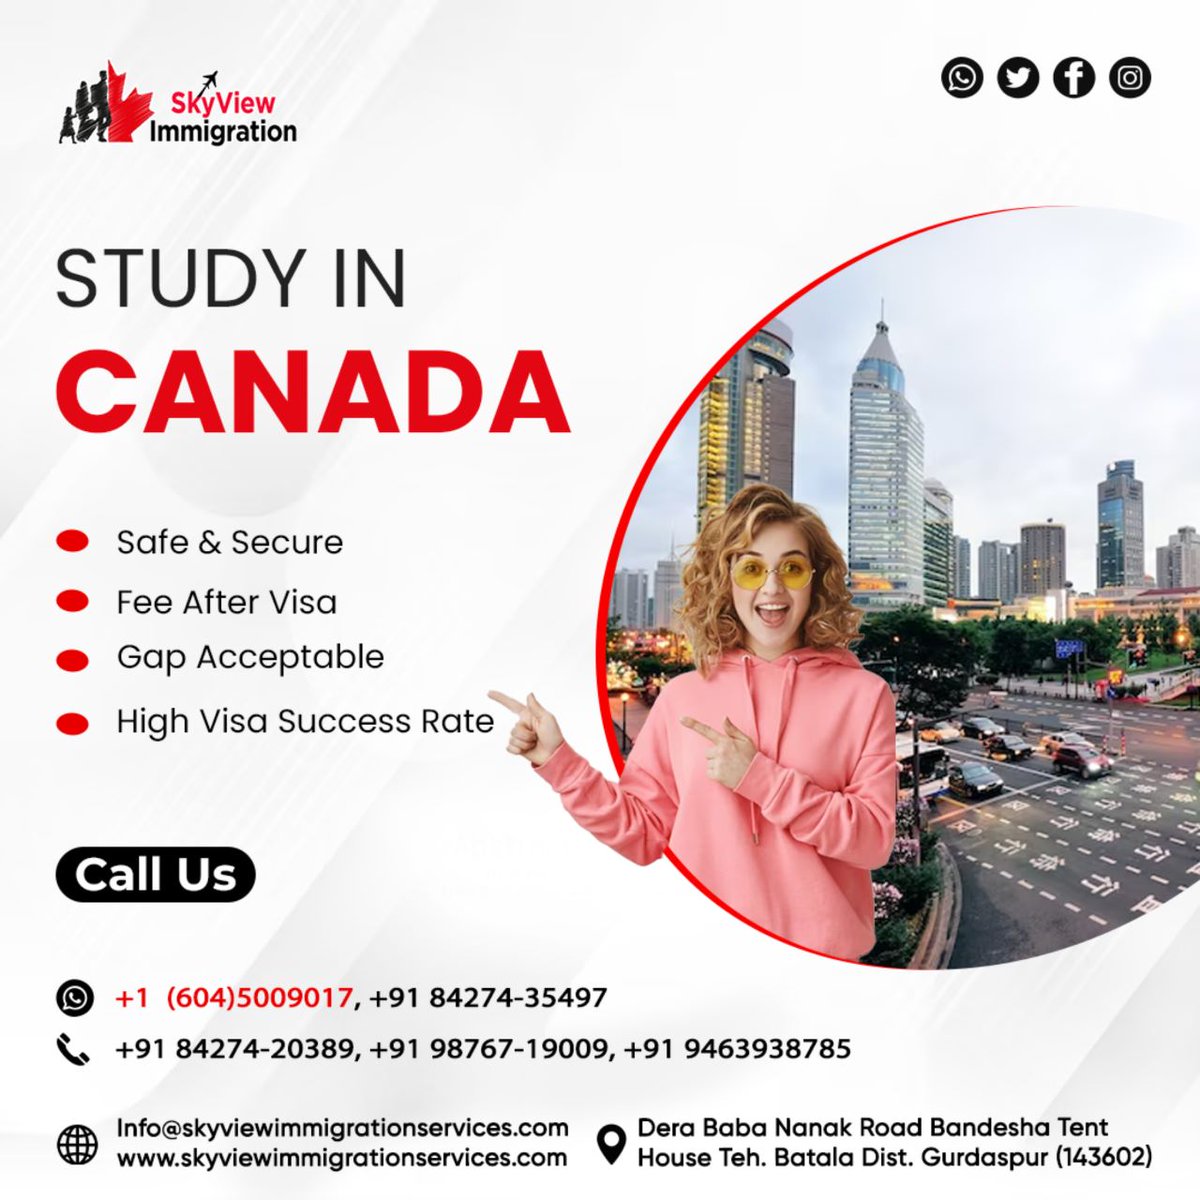 Study In Canada!
Call Now
+91 98767-19009
+91 84274-20389
+91 94639-38785
+91 62842-42744
Email: info@skyviewimmigrationservices.com
Visit Us: skyviewimmigrationservices.com
#skyviewimmigration #studyingabroad  #canadastudyvisa #DreamWorks #canadastudy #successmindsets #successtimes